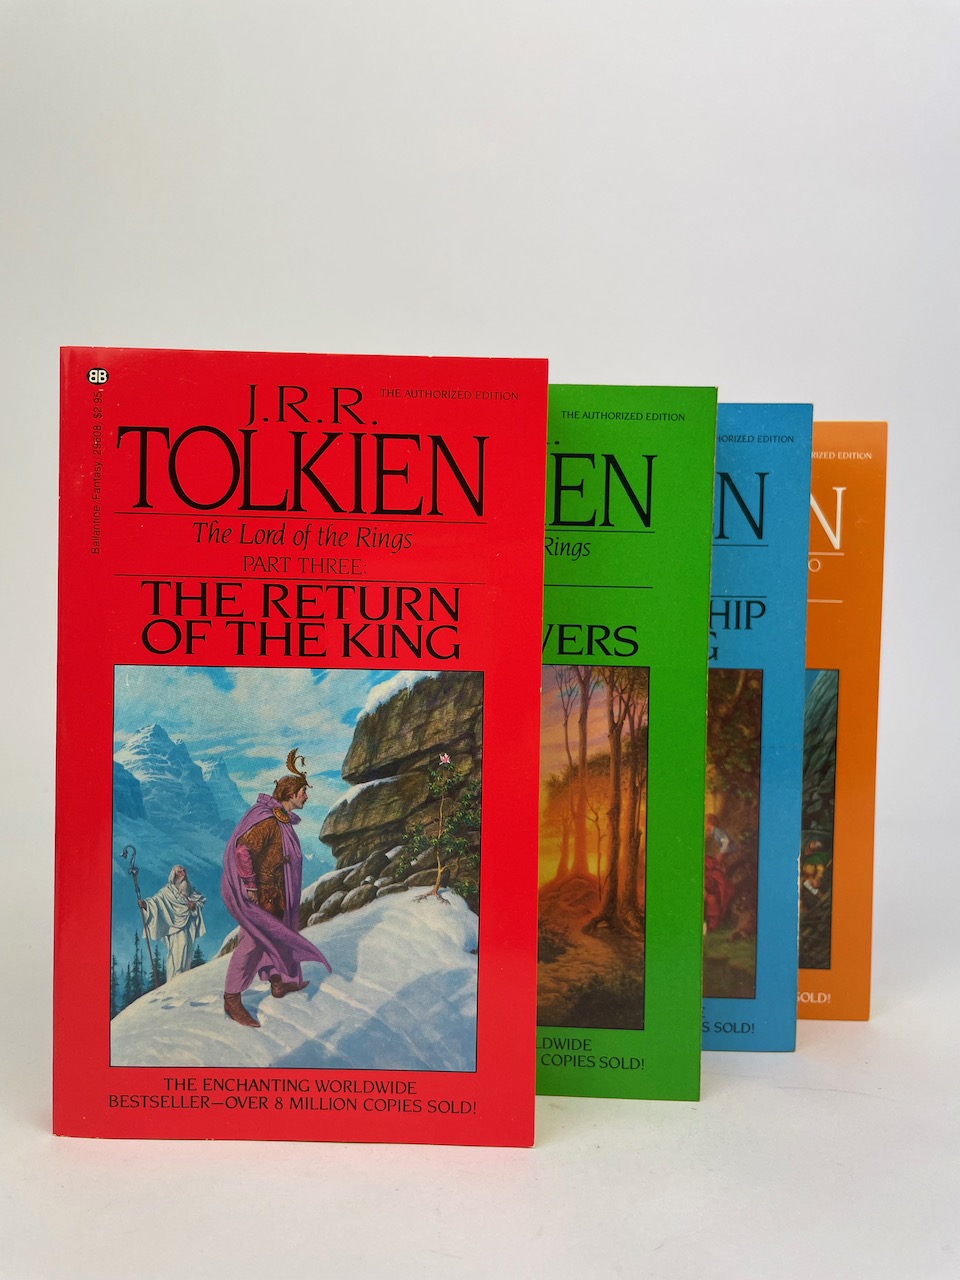 The Lord of the Rings and The Hobbit set from 1984, by Ballantine Books, New York 16